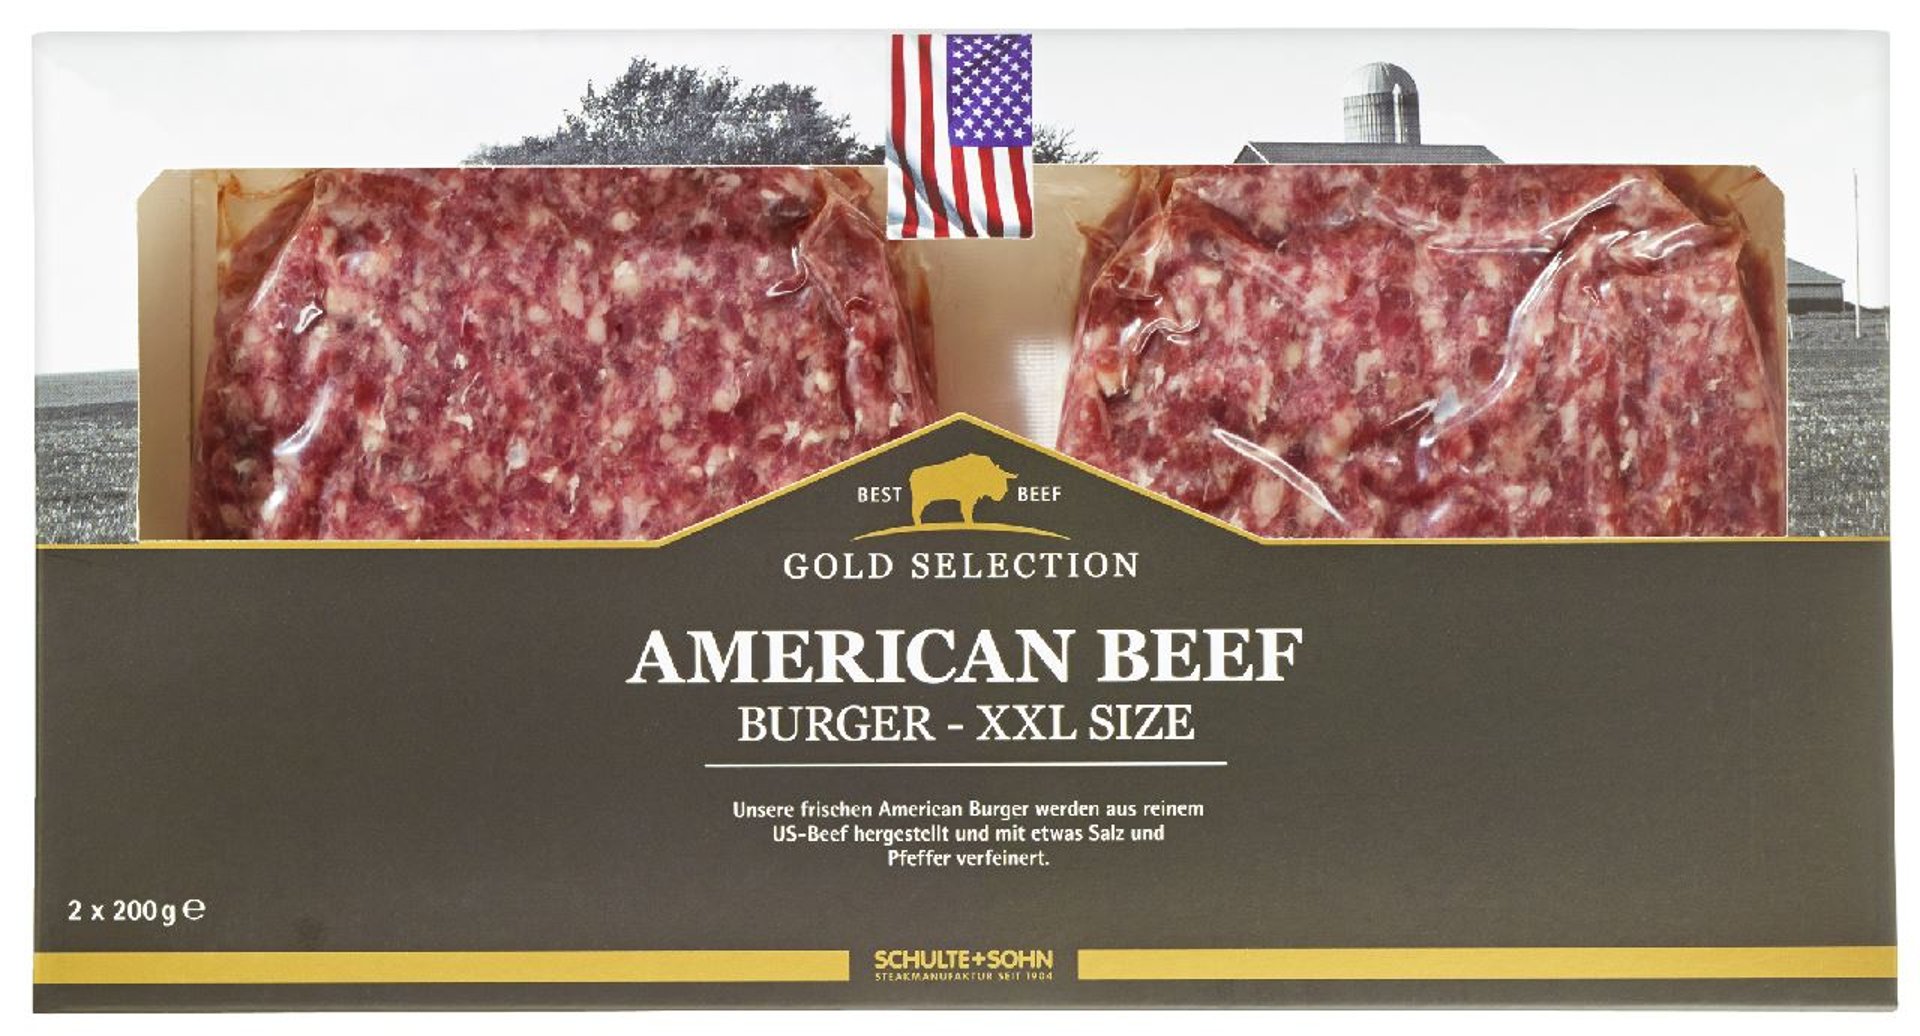 Schulte & Sohn - American Beef Burger 2 x 200 g - 400 g Packung